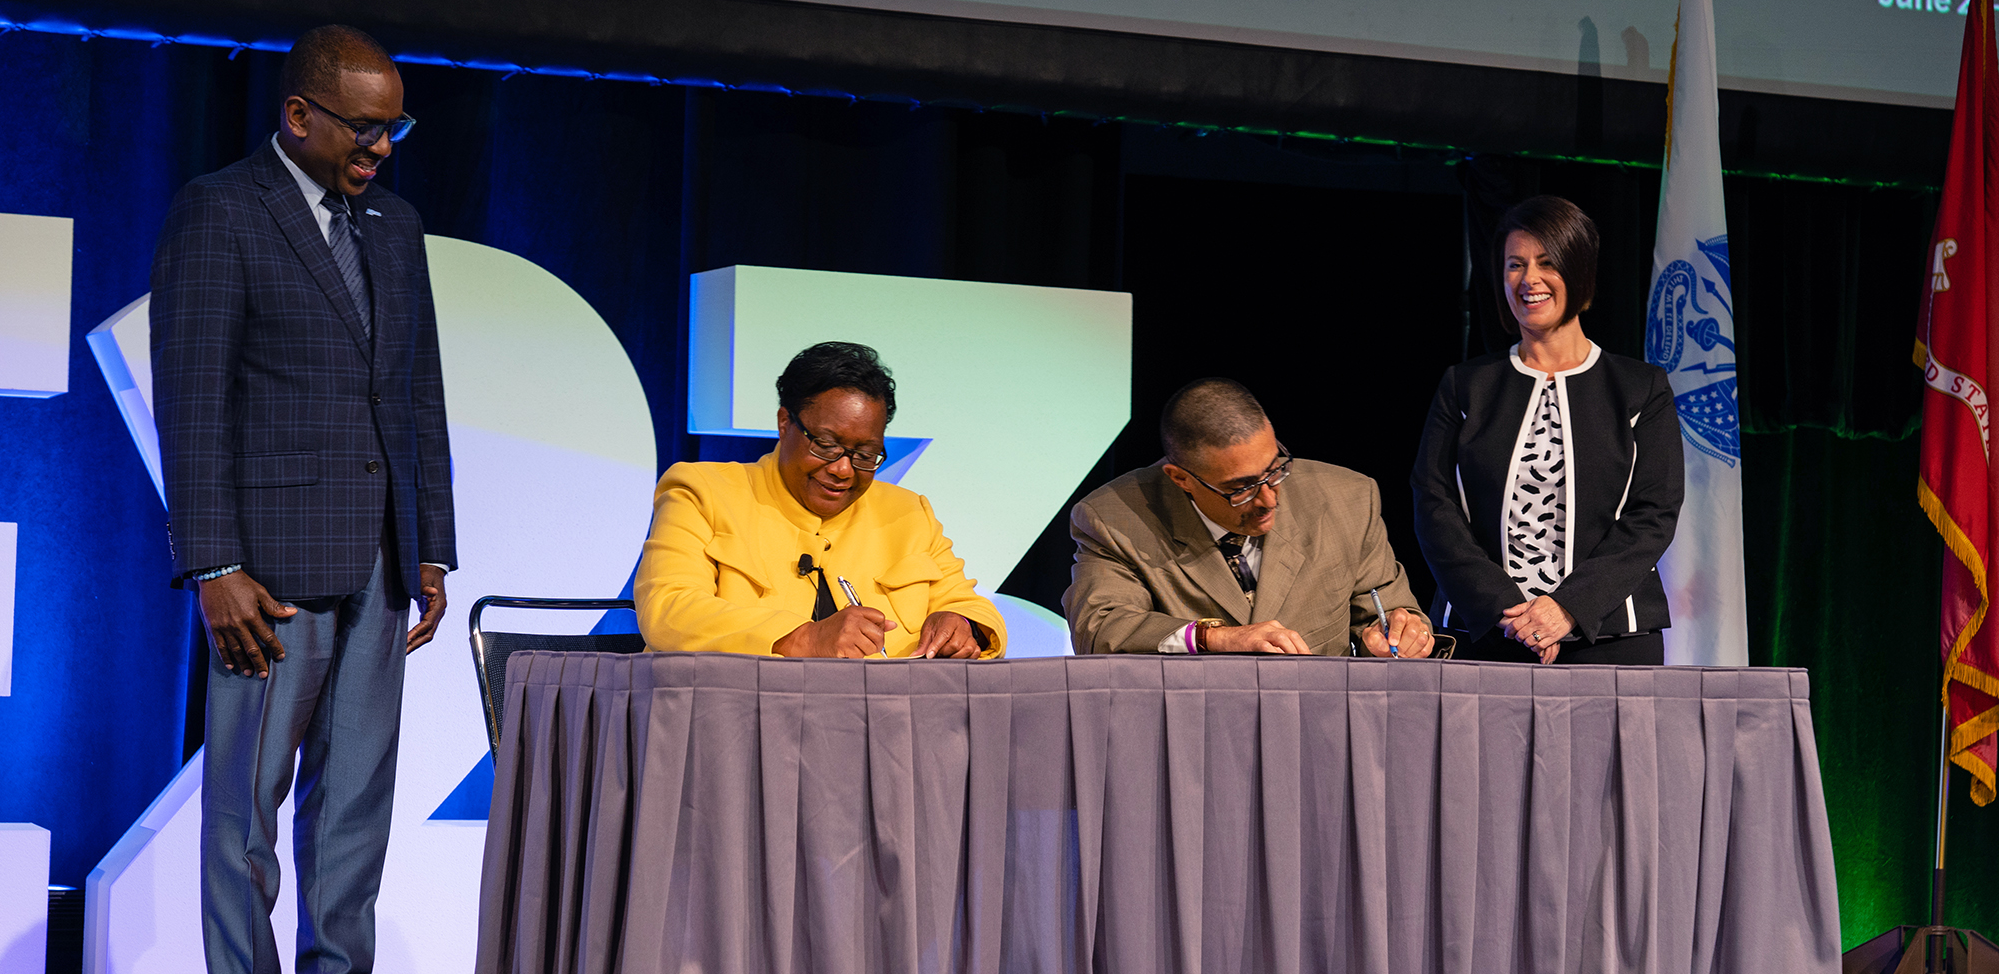 Carolyn Hardin, Chief of Training and Research at All Rise, left center, signs the MOU with NTCAA Chair Carlos Gonzales, right center, as Terrence Walton, All Rise COO, left, and Abby Frutchey, NTCAA vice chair and All Rise board member, right, look on.